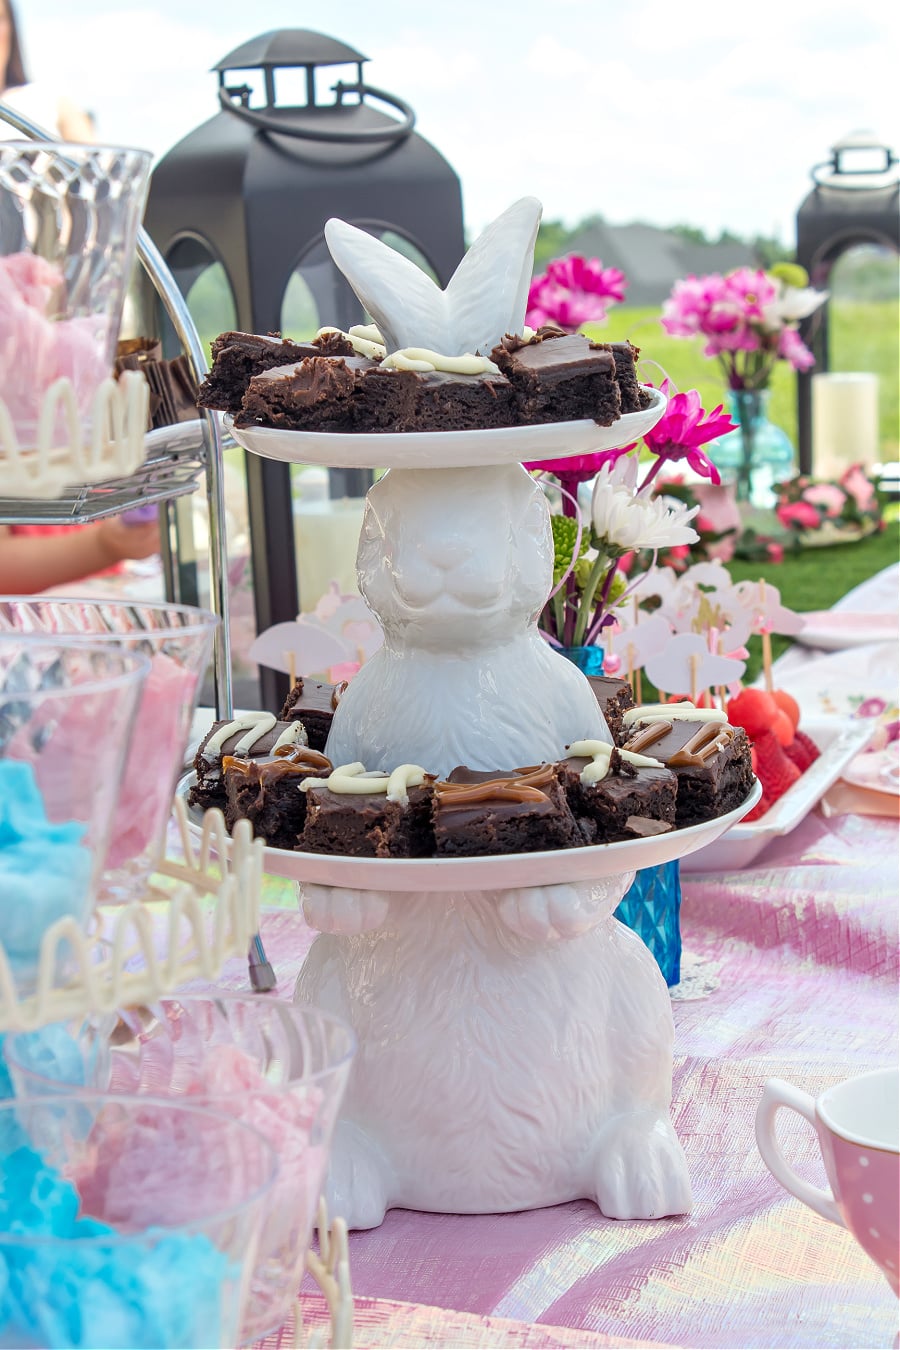 A ceramic tiered bunny food stand with brownie bites being served for a tea party.